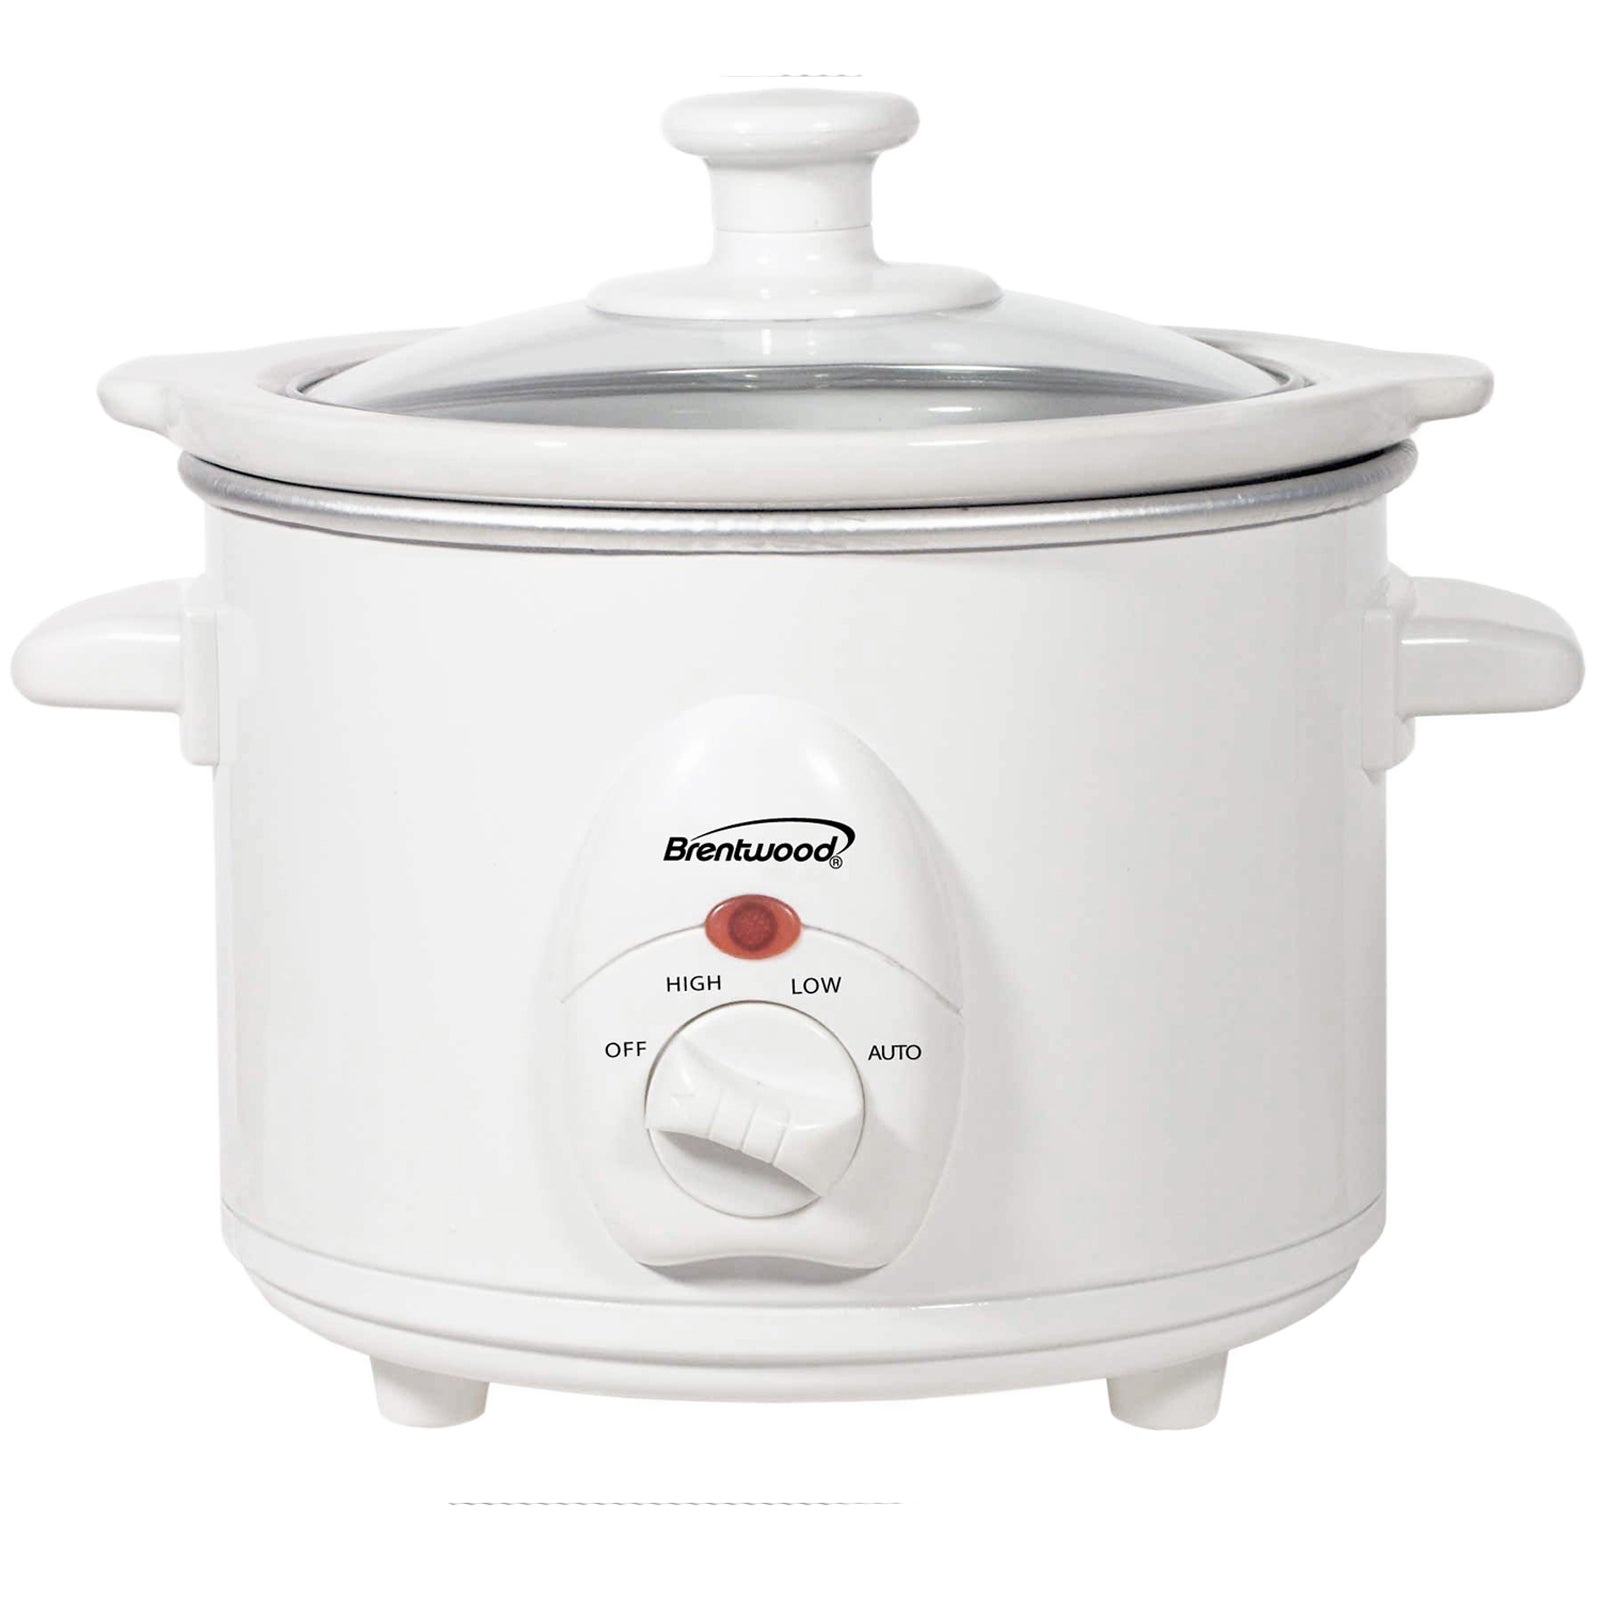 BRENTWOOD Brentwood 1.5 QT Slow Cooker in White